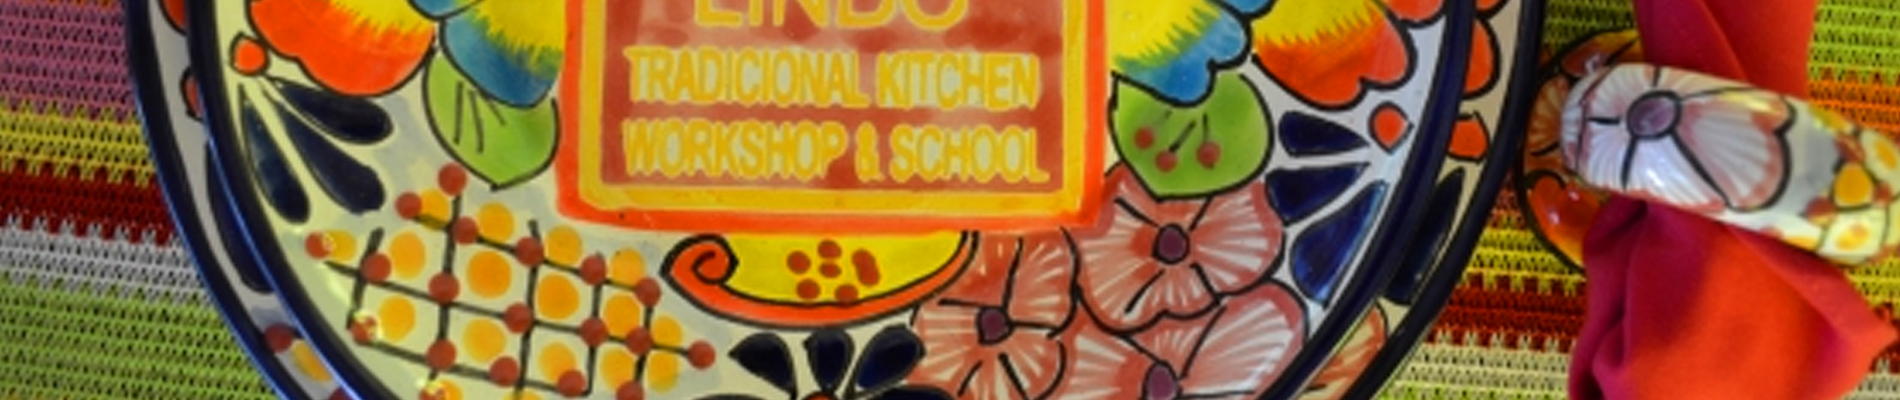 canucn cooking school